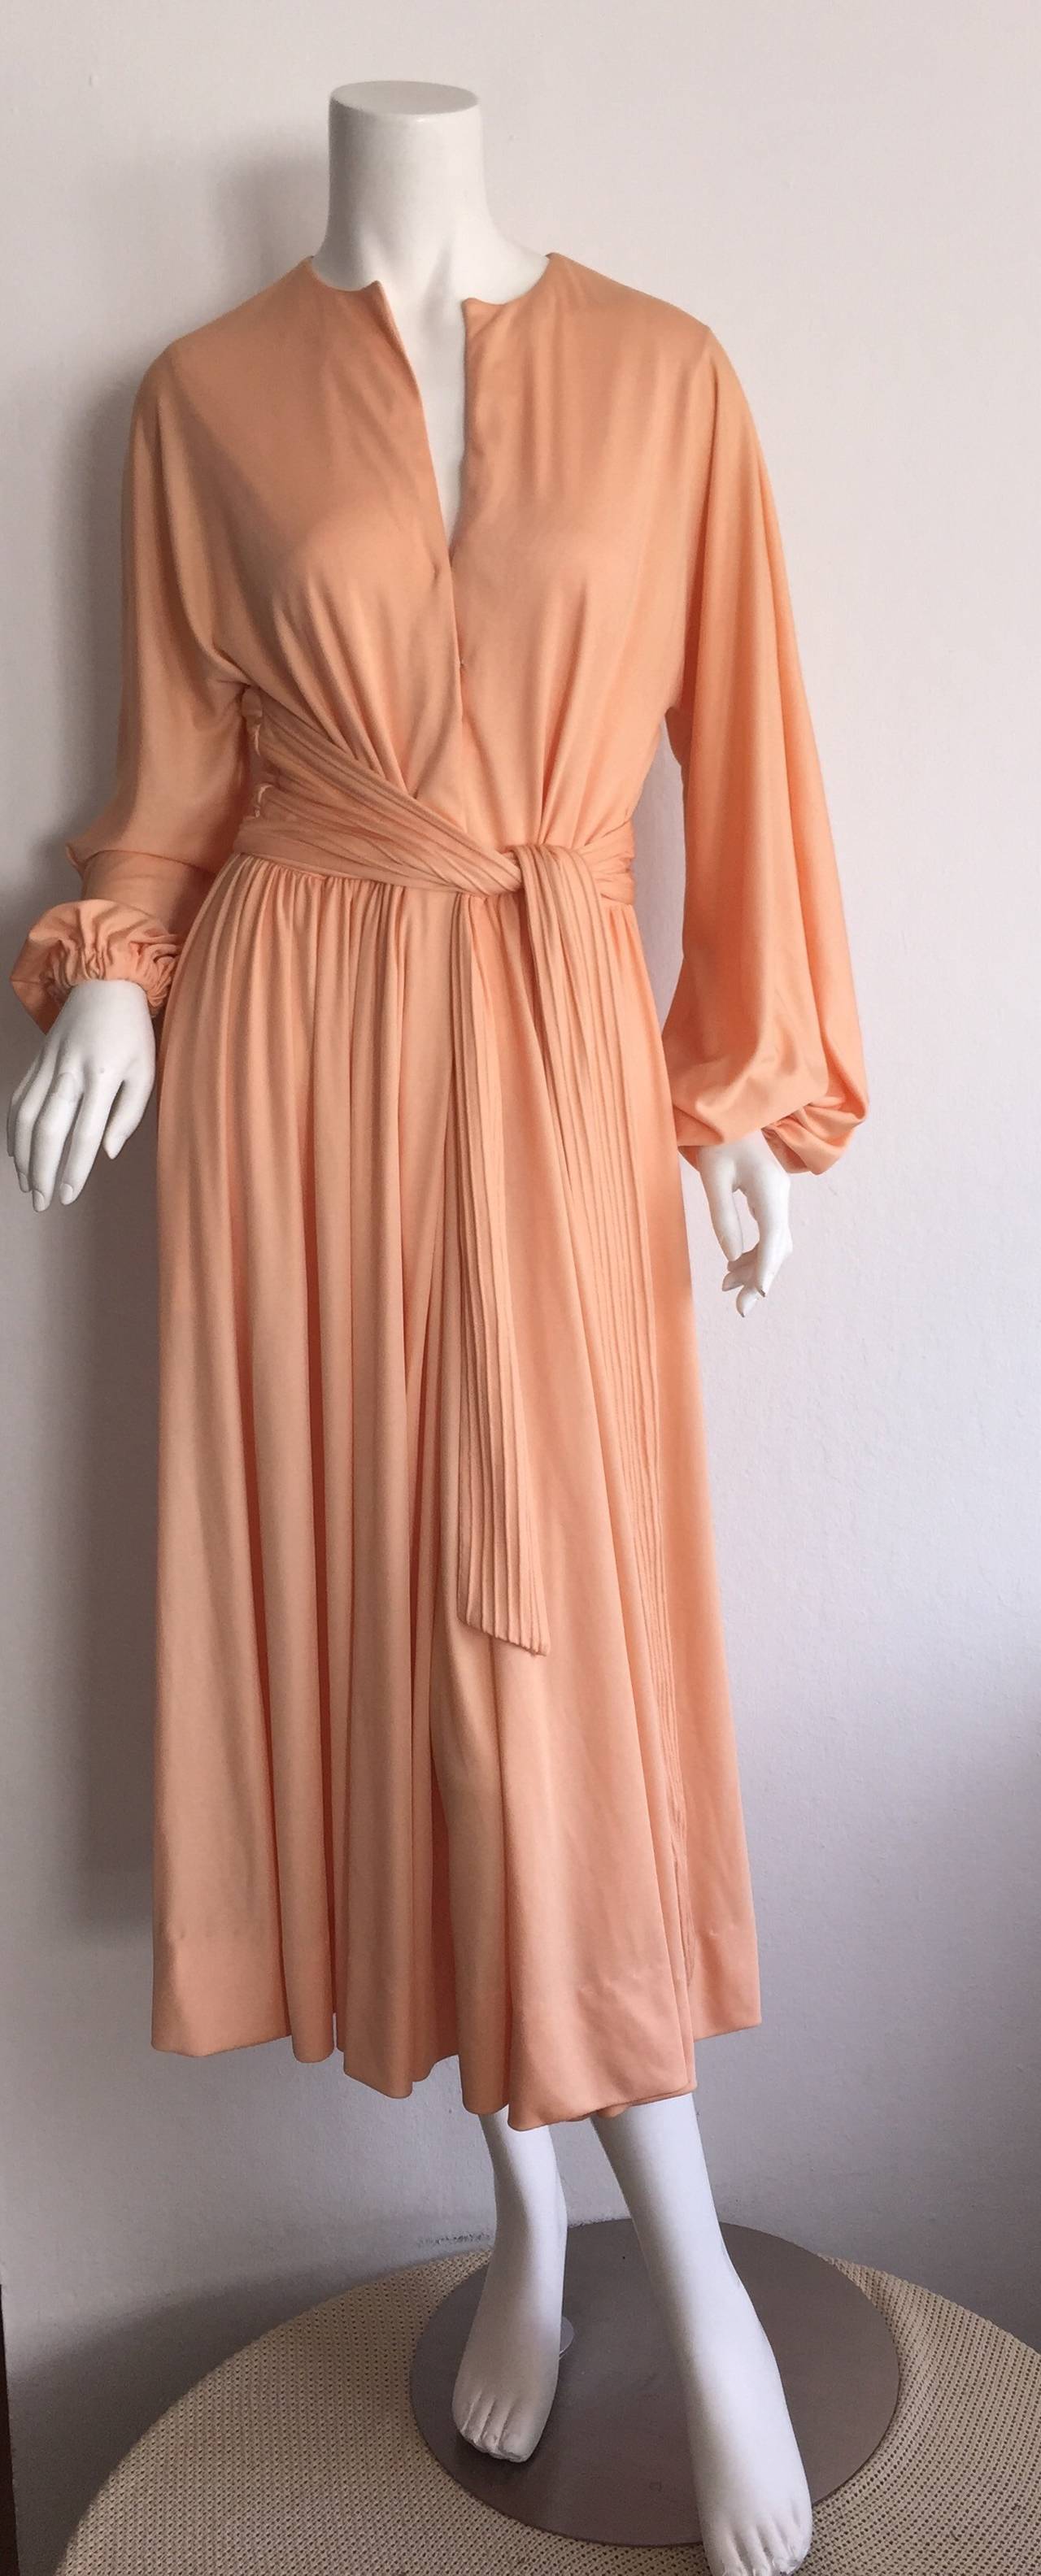 Gorgeous vintage Donald Brooks coral colored jersey wrap dress! So much detail to this flattering frock! Attached pleated wrap belt gives so much slimming detail to the back. Wonderful billow sleeves make for the perfect romantic effect. Can easily